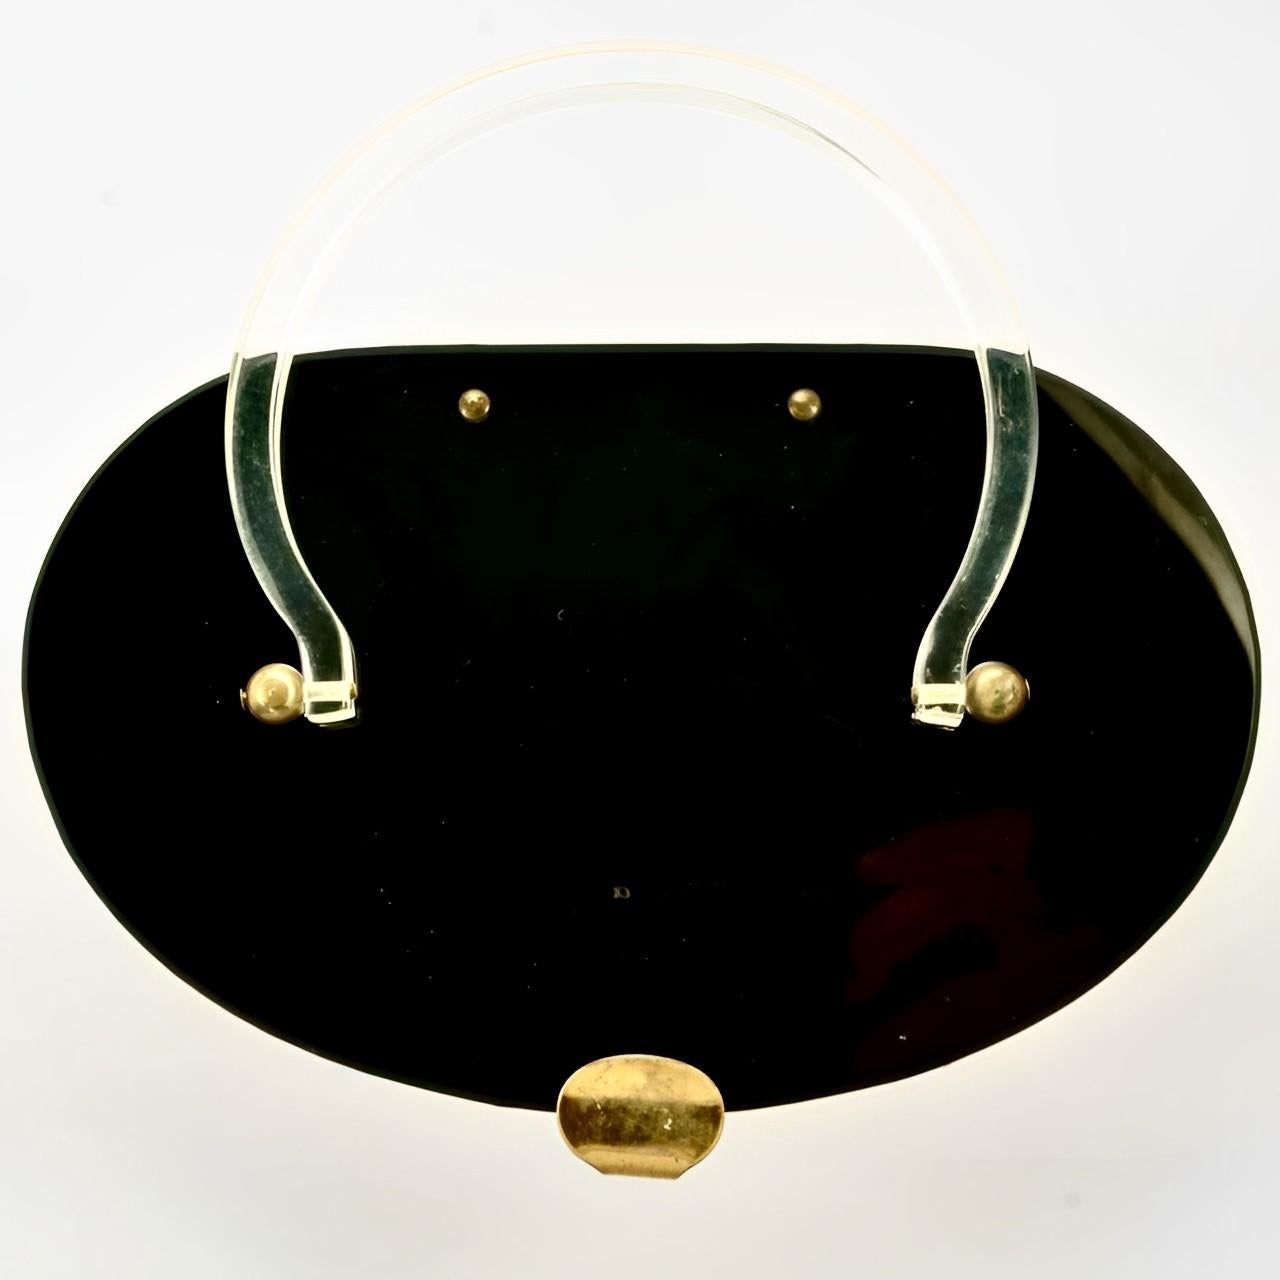 Brown Gold Plated Flower Filigree Black and Clear Lucite Handbag circa 1950s For Sale